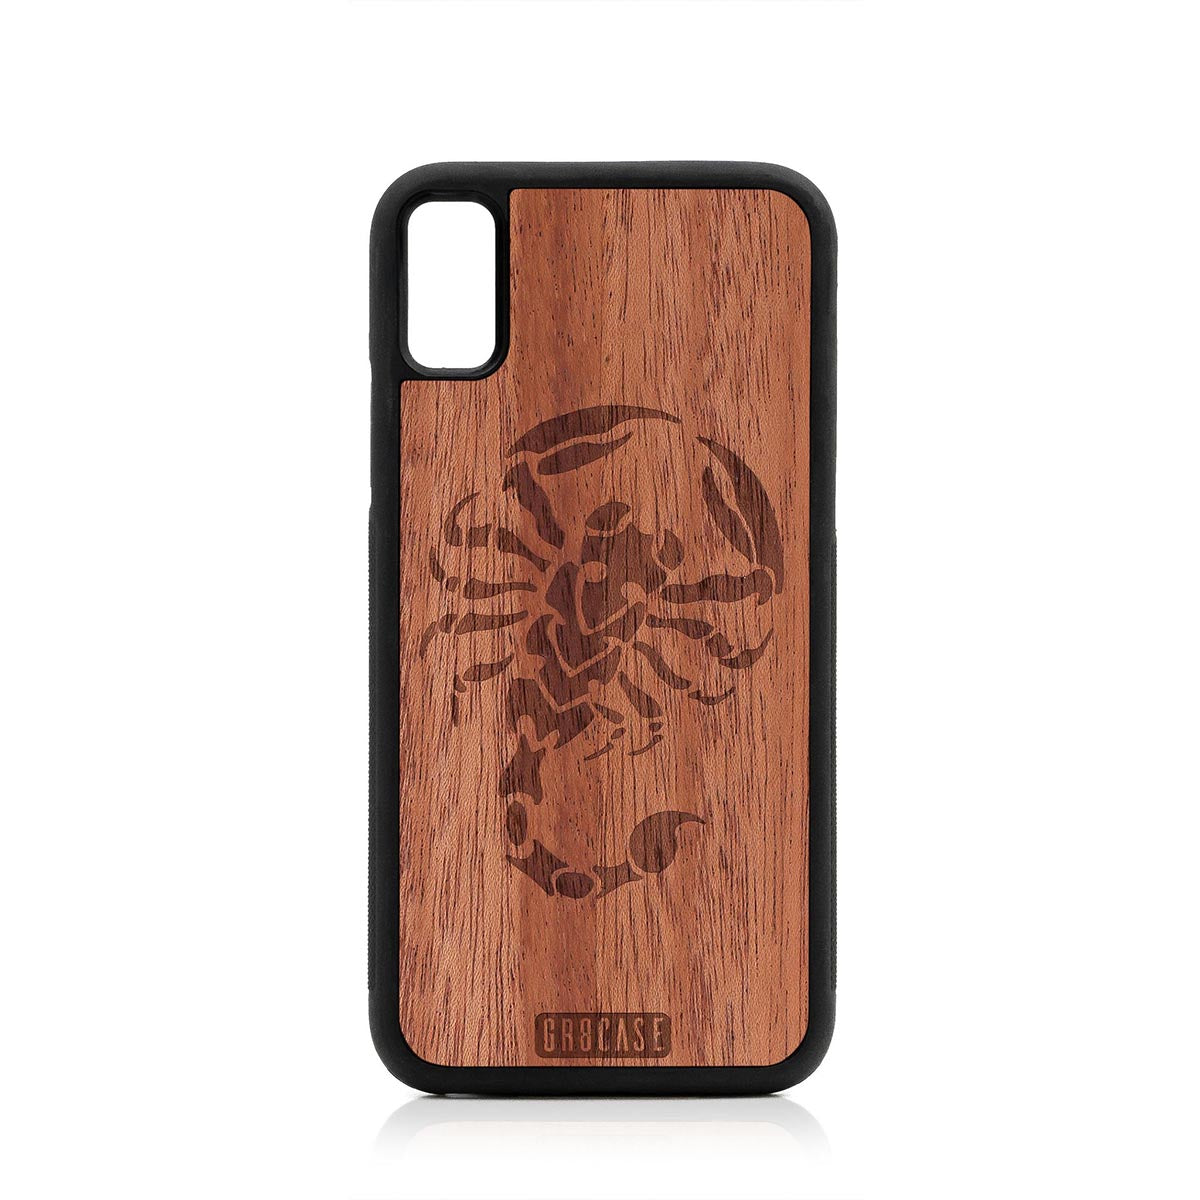 Scorpion Design Wood Case For iPhone XR by GR8CASE